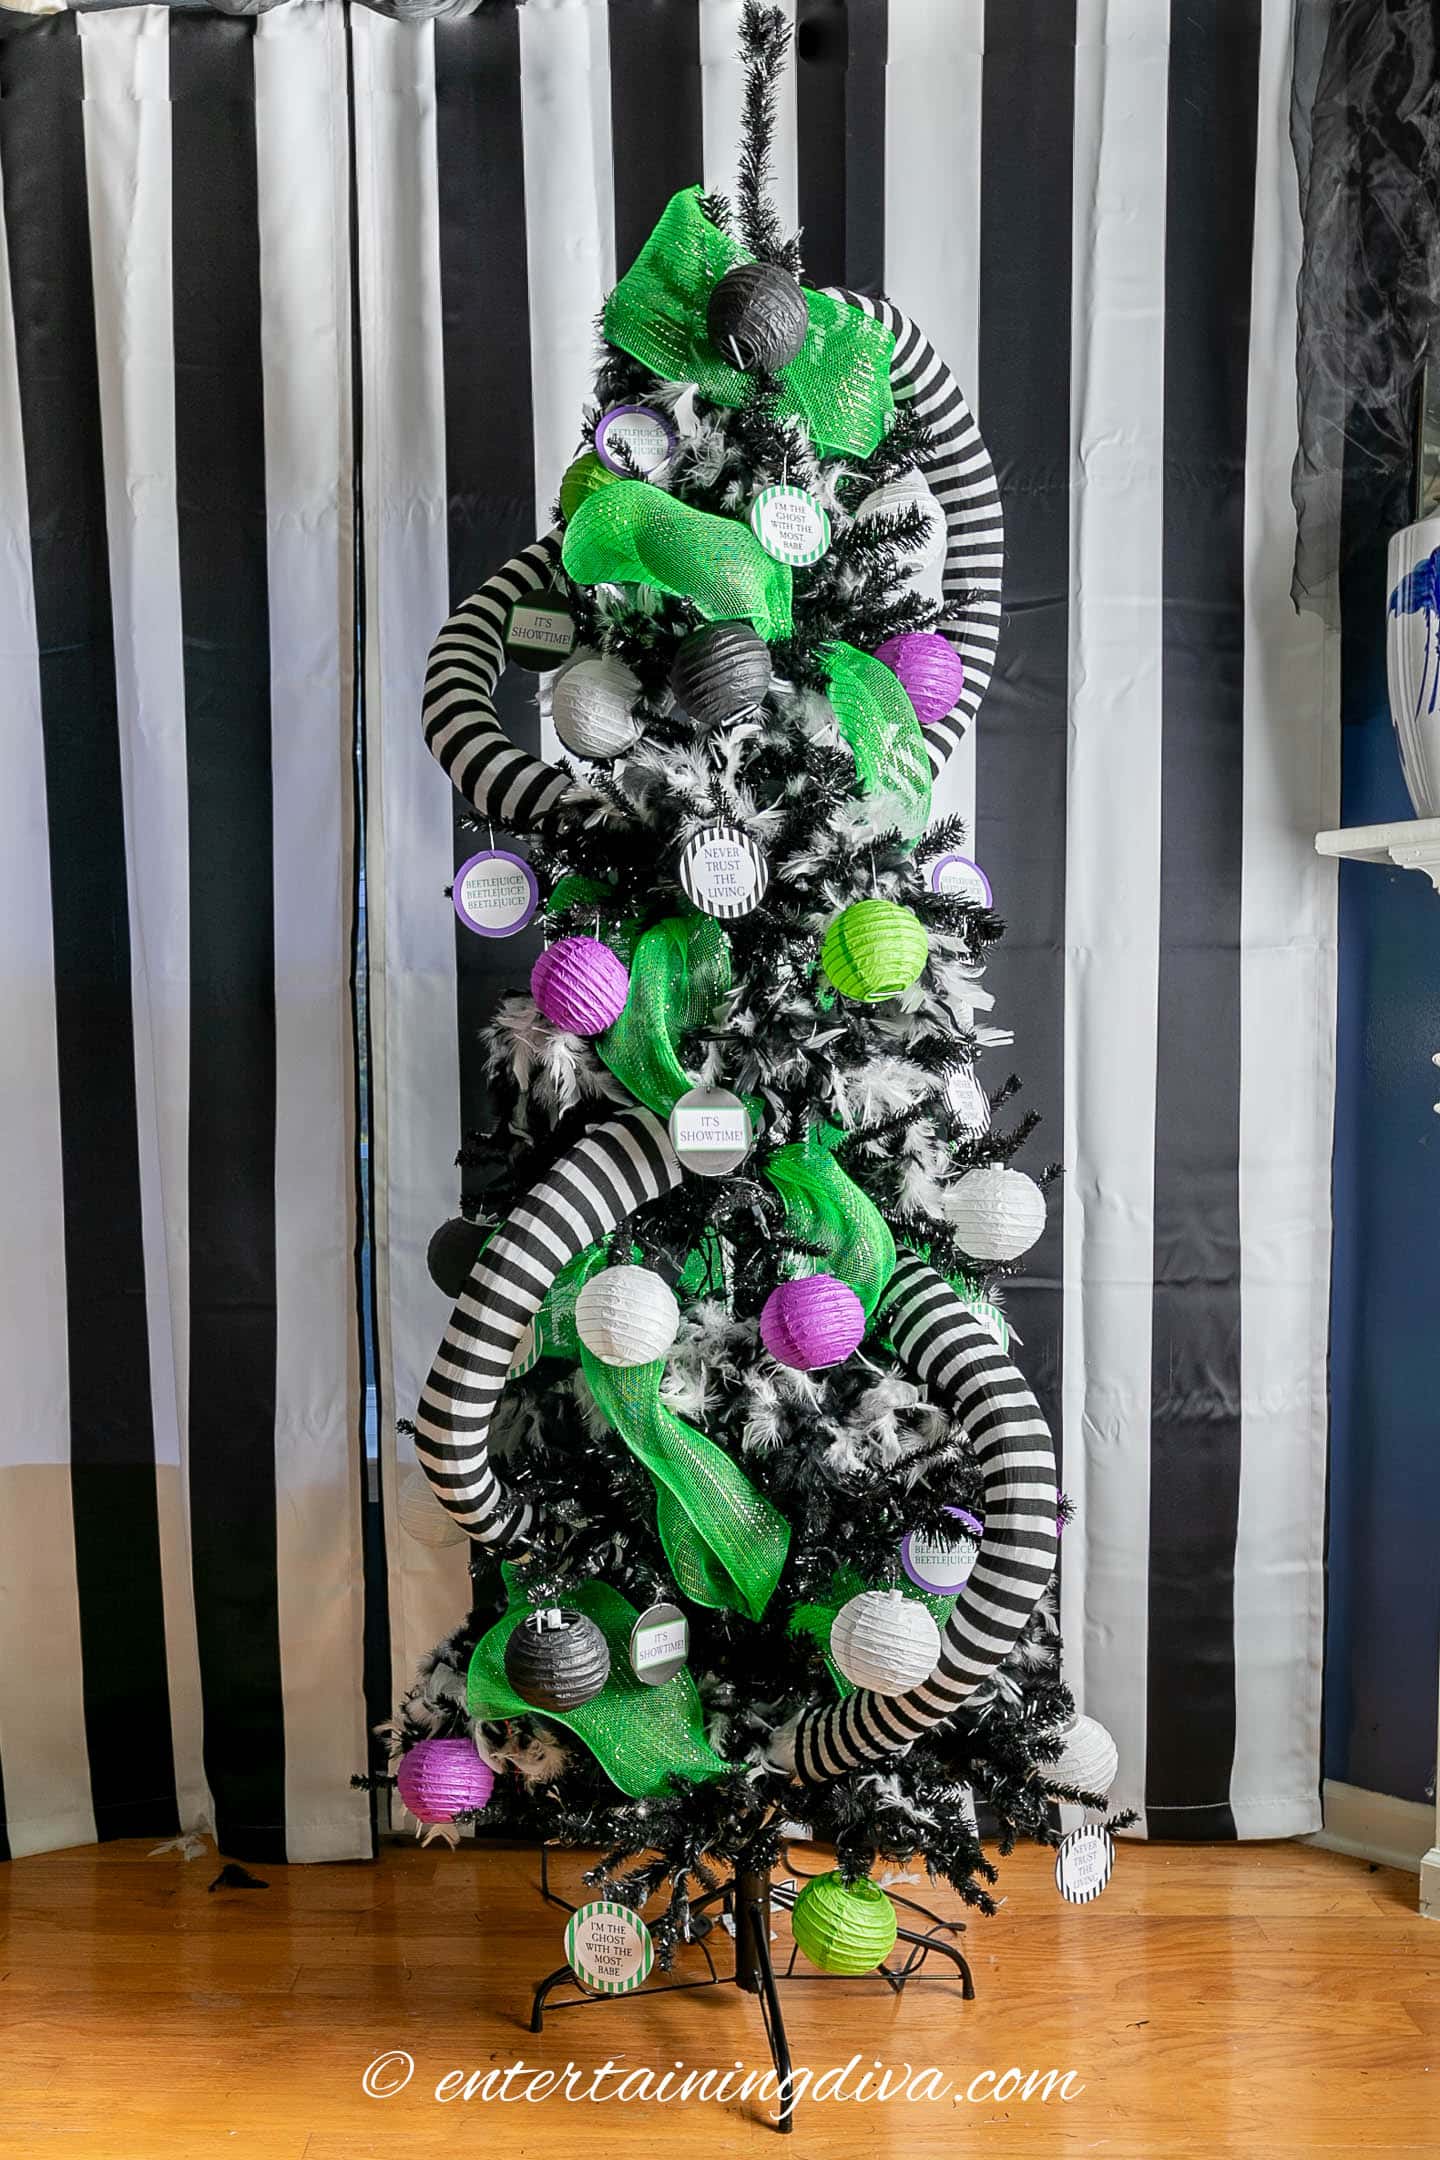 Black and white striped sandworms on a Beetlejuice Halloween tree with other black, white, purple and green decorations